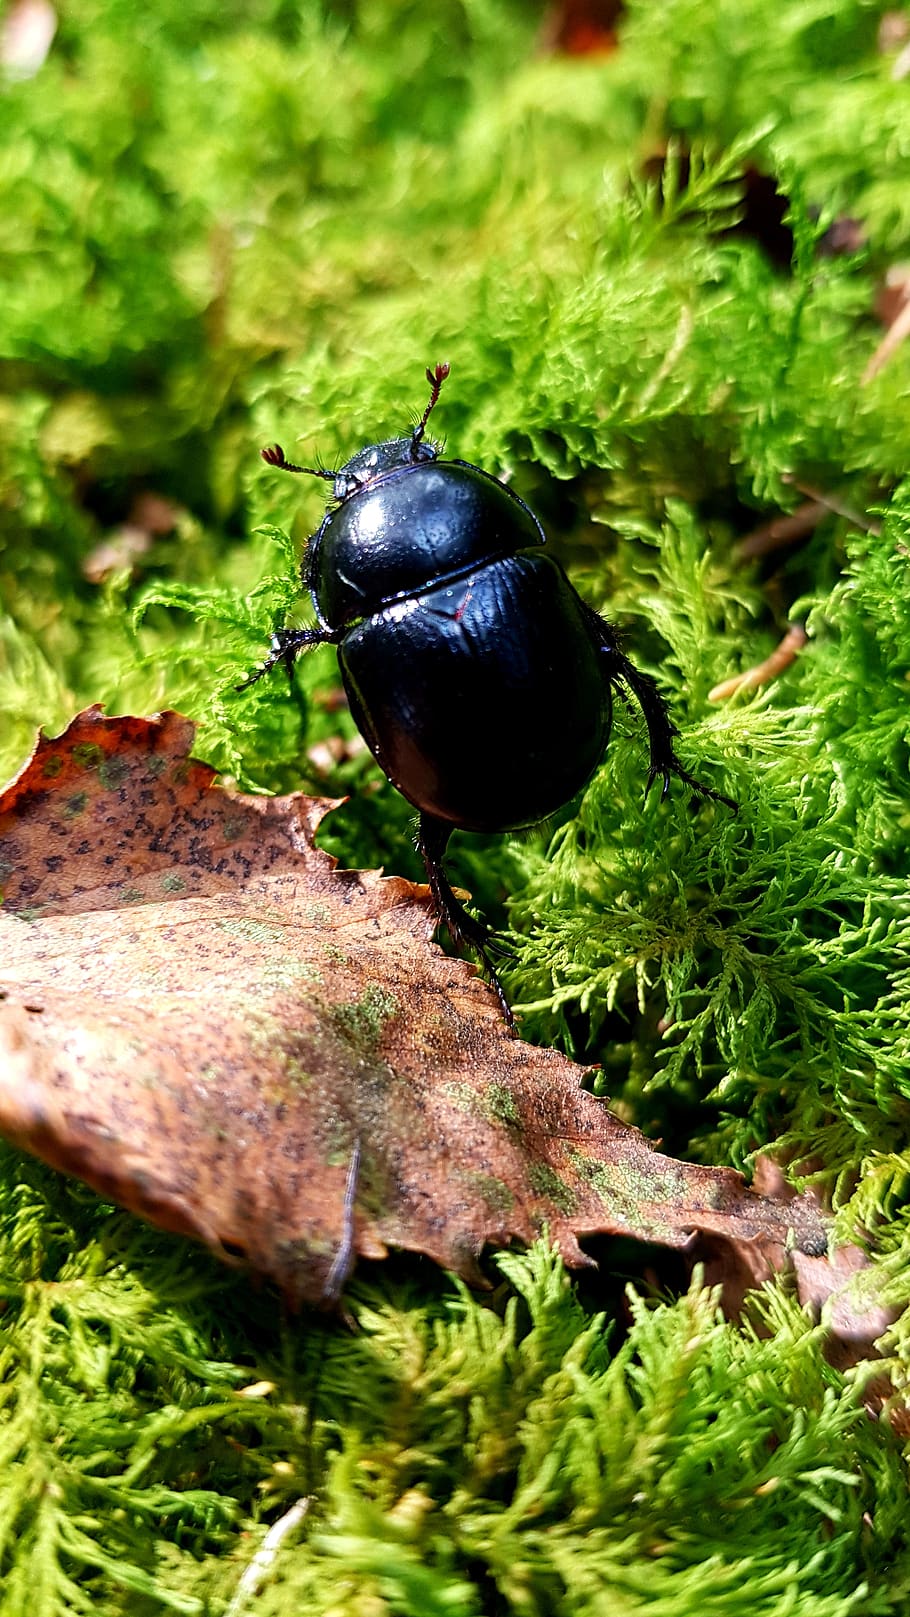 forest dung beetle, anoplotrupes stercorosus, beetle, forest, moss, leaf, fallen, plant, animals in the wild, animal themes